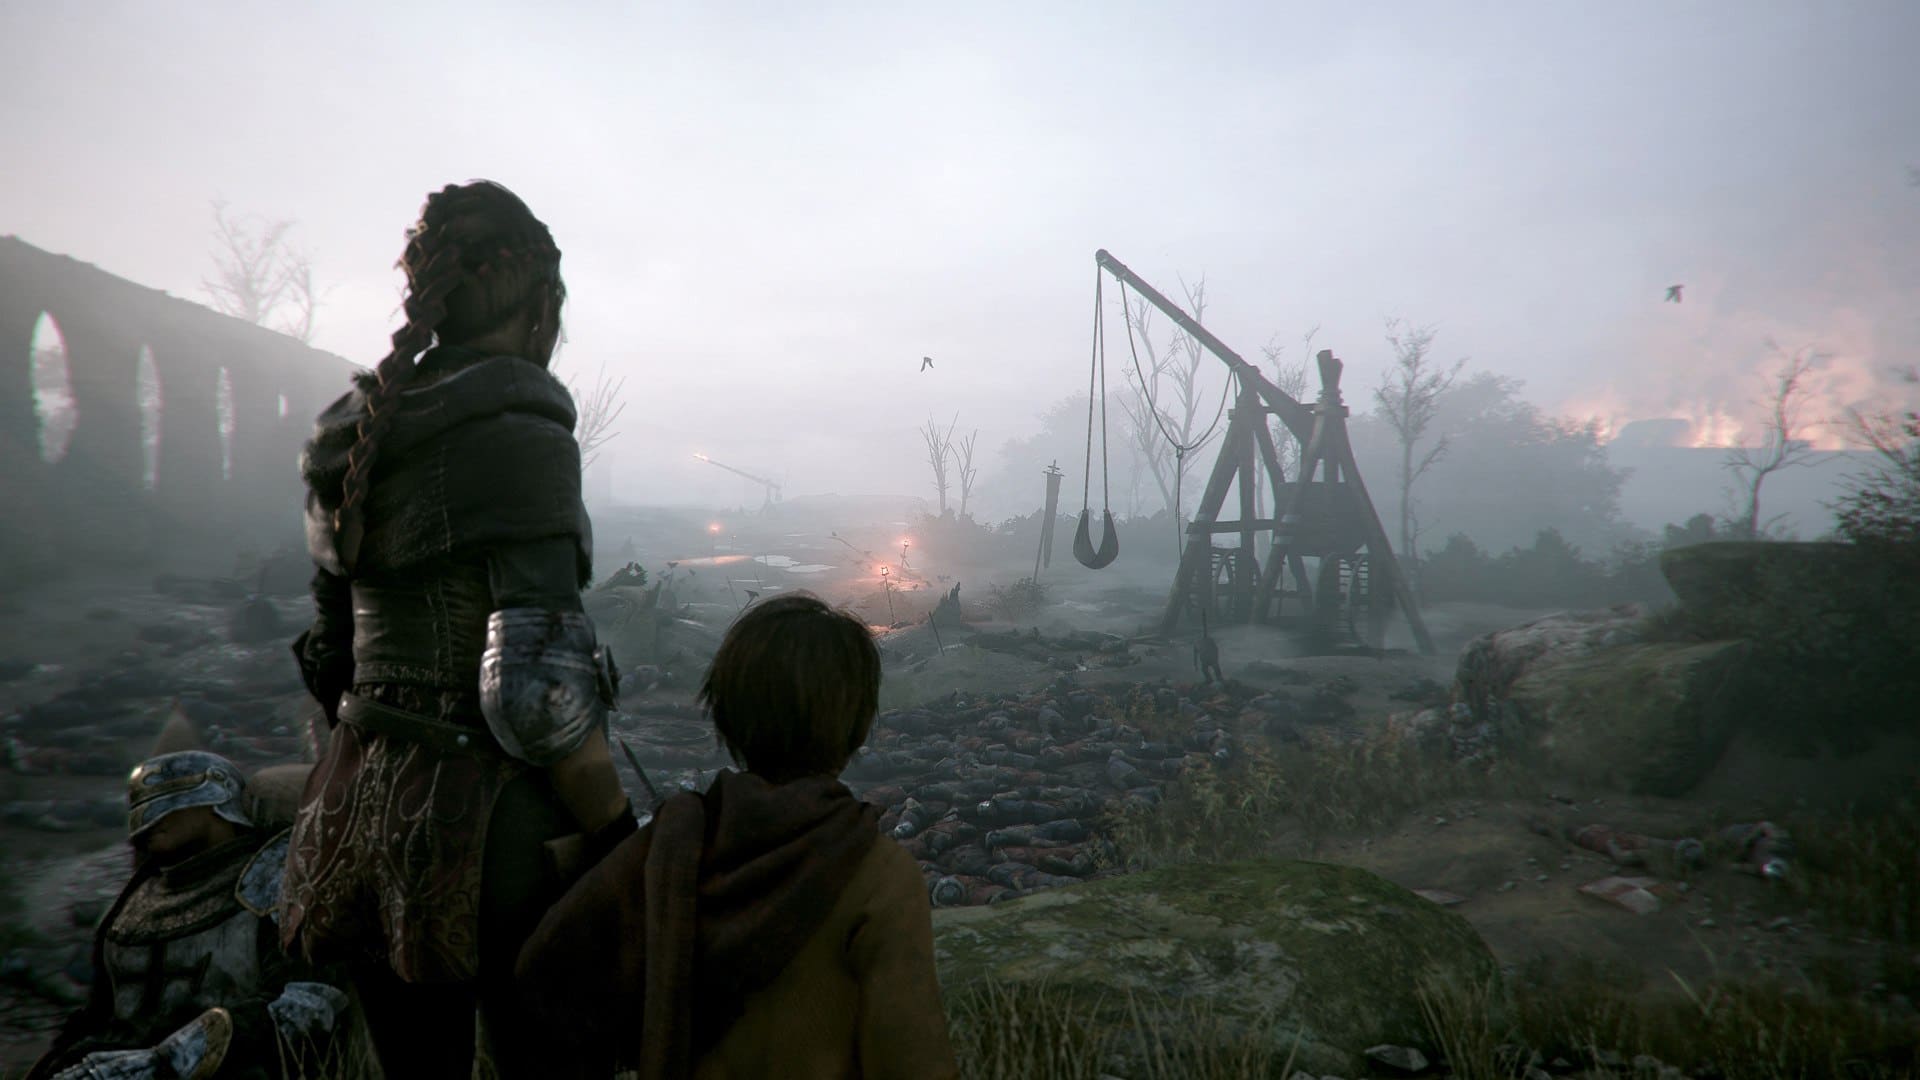 So the PSPlus version of A Plague Tale: Innocence downloads the